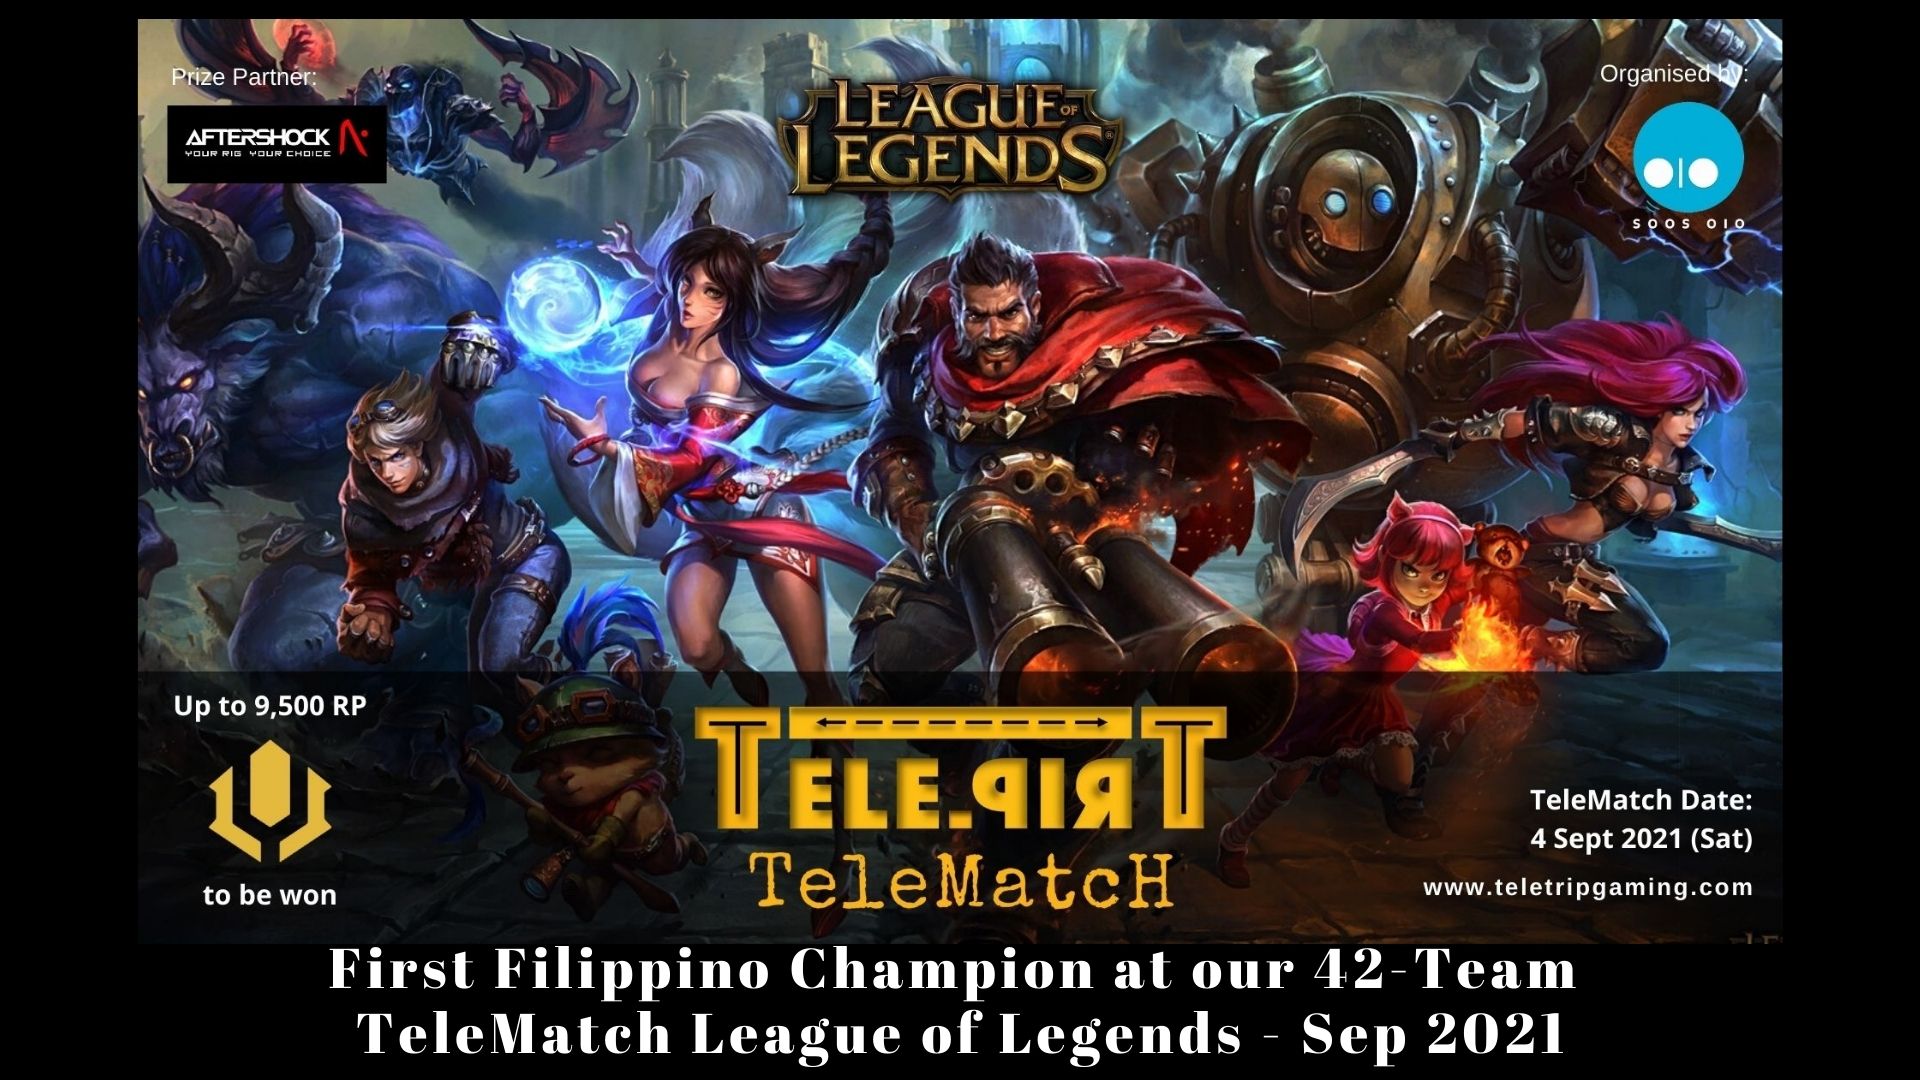 First Filippino Champion at our 42-Team TeleMatch League of Legends - 4 Sep 2021